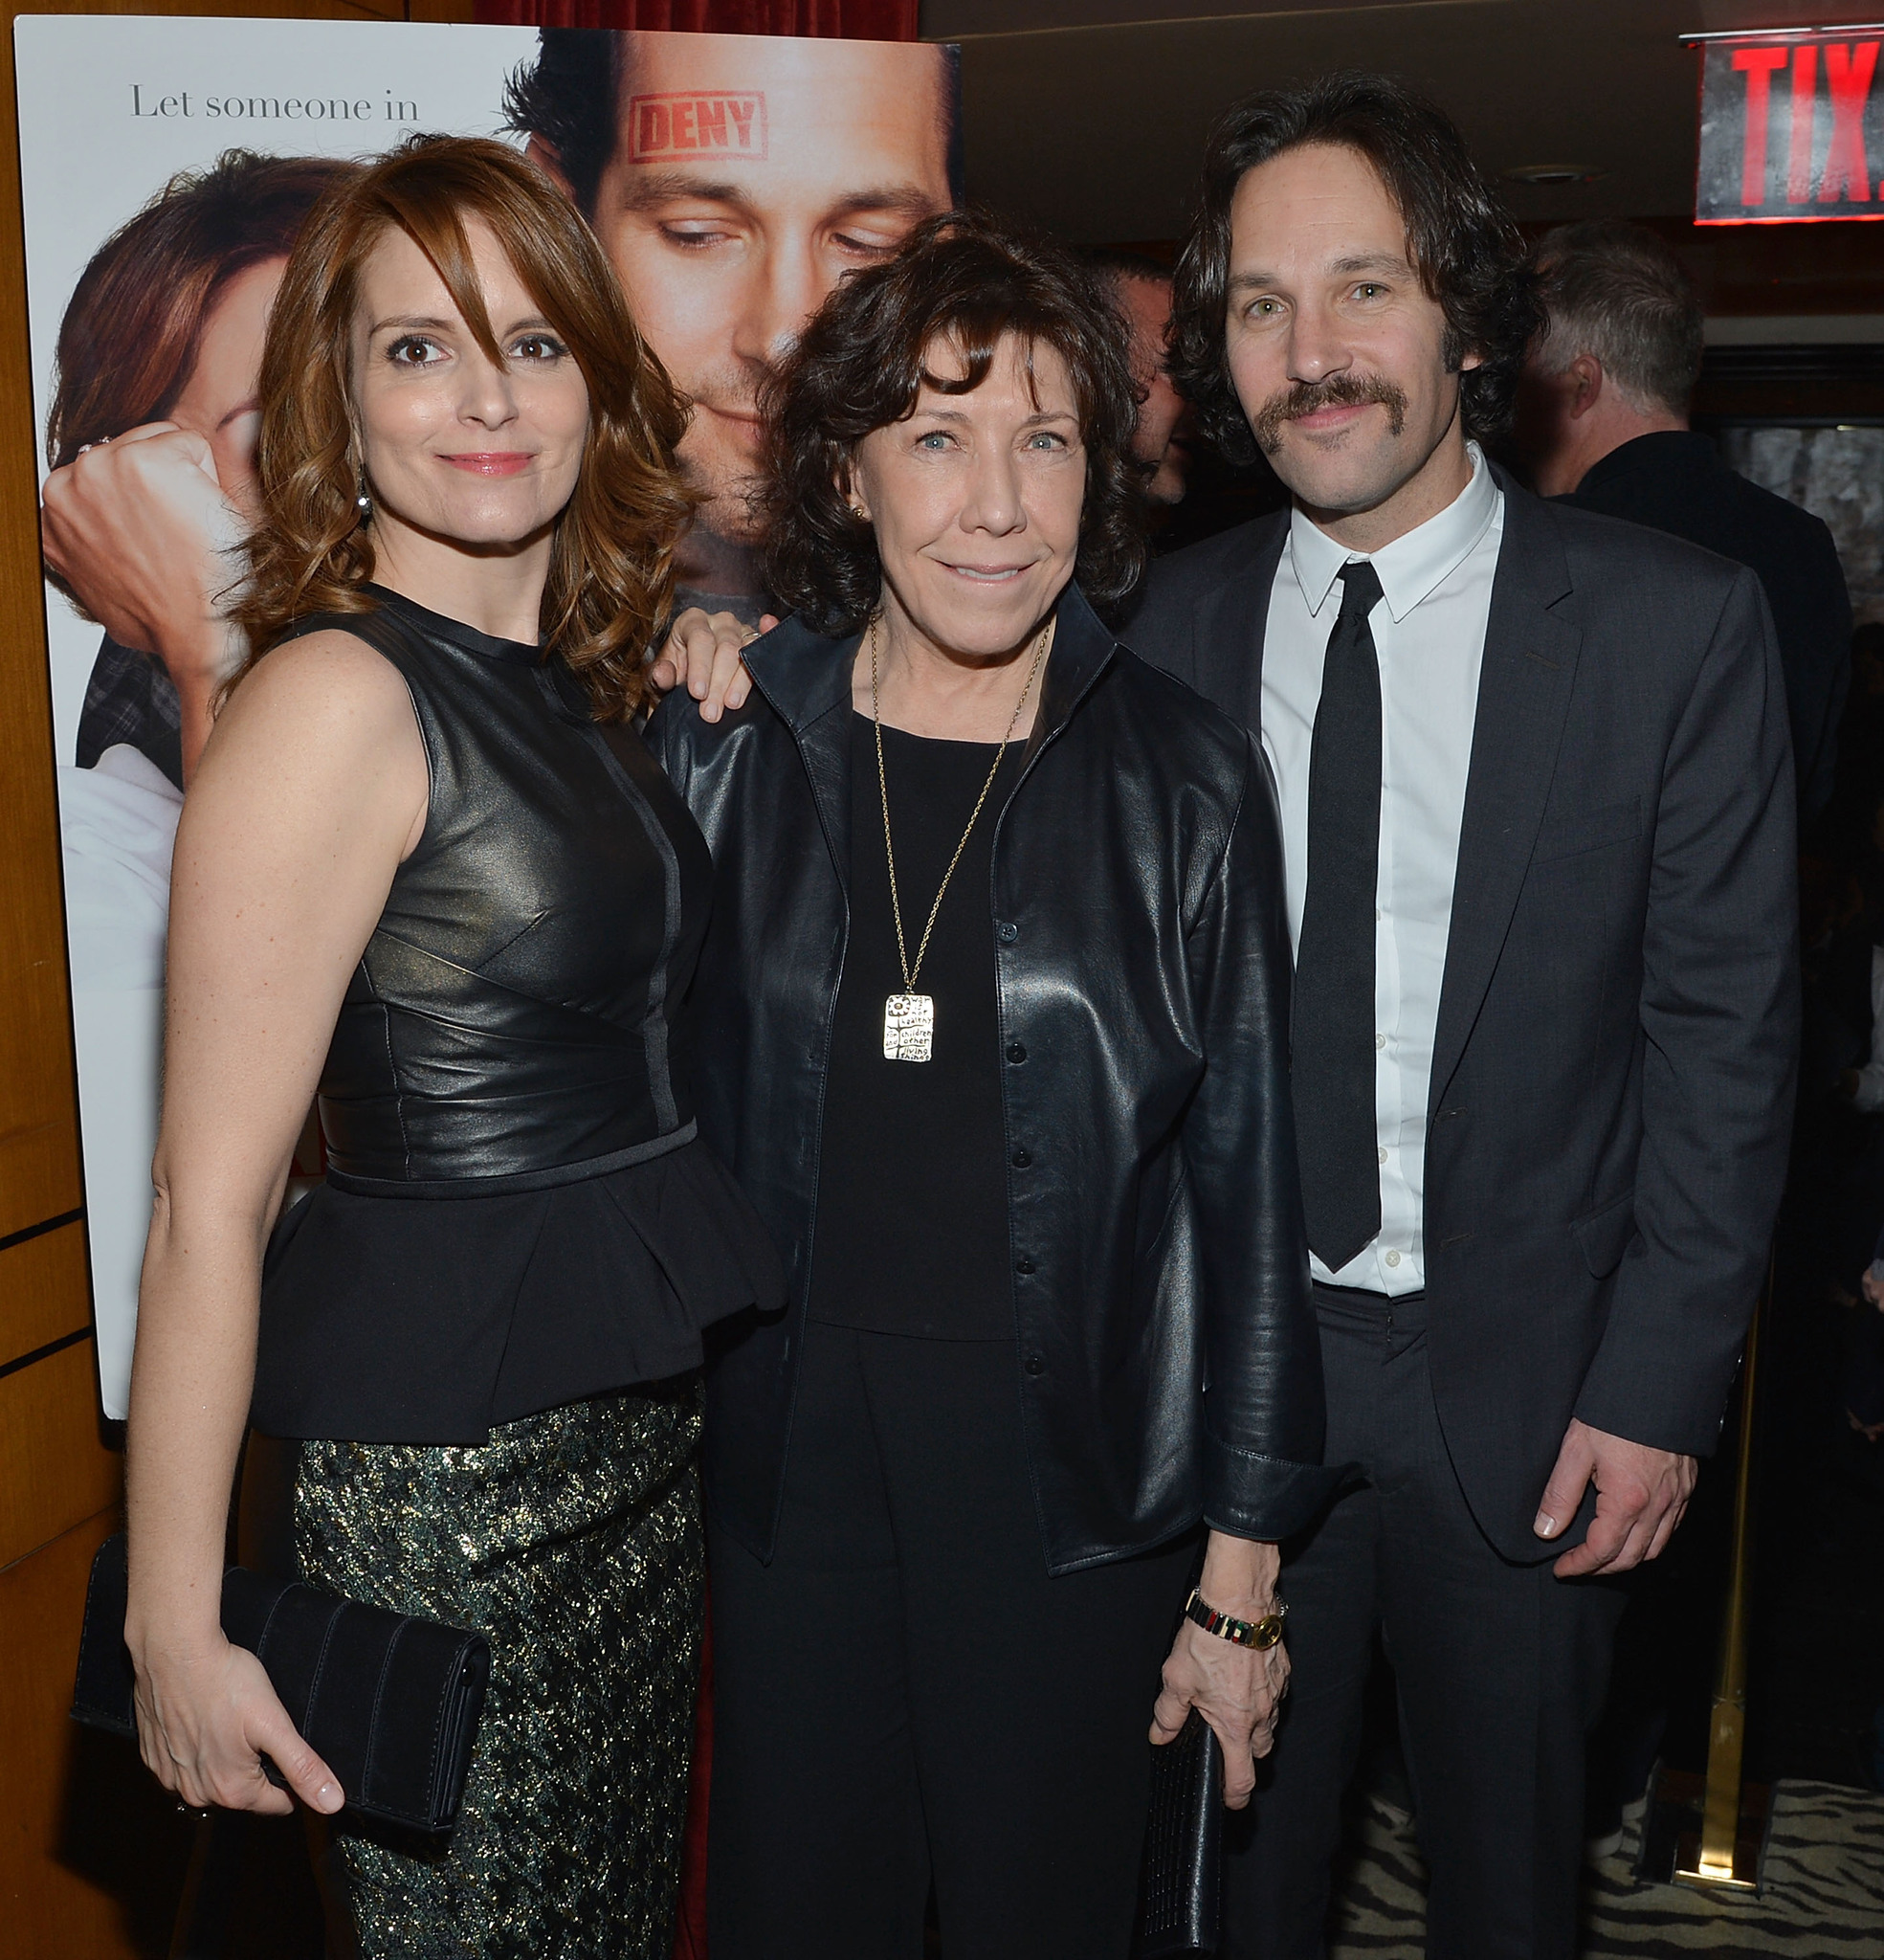 Lily Tomlin, Tina Fey and Paul Rudd at event of Admission (2013)